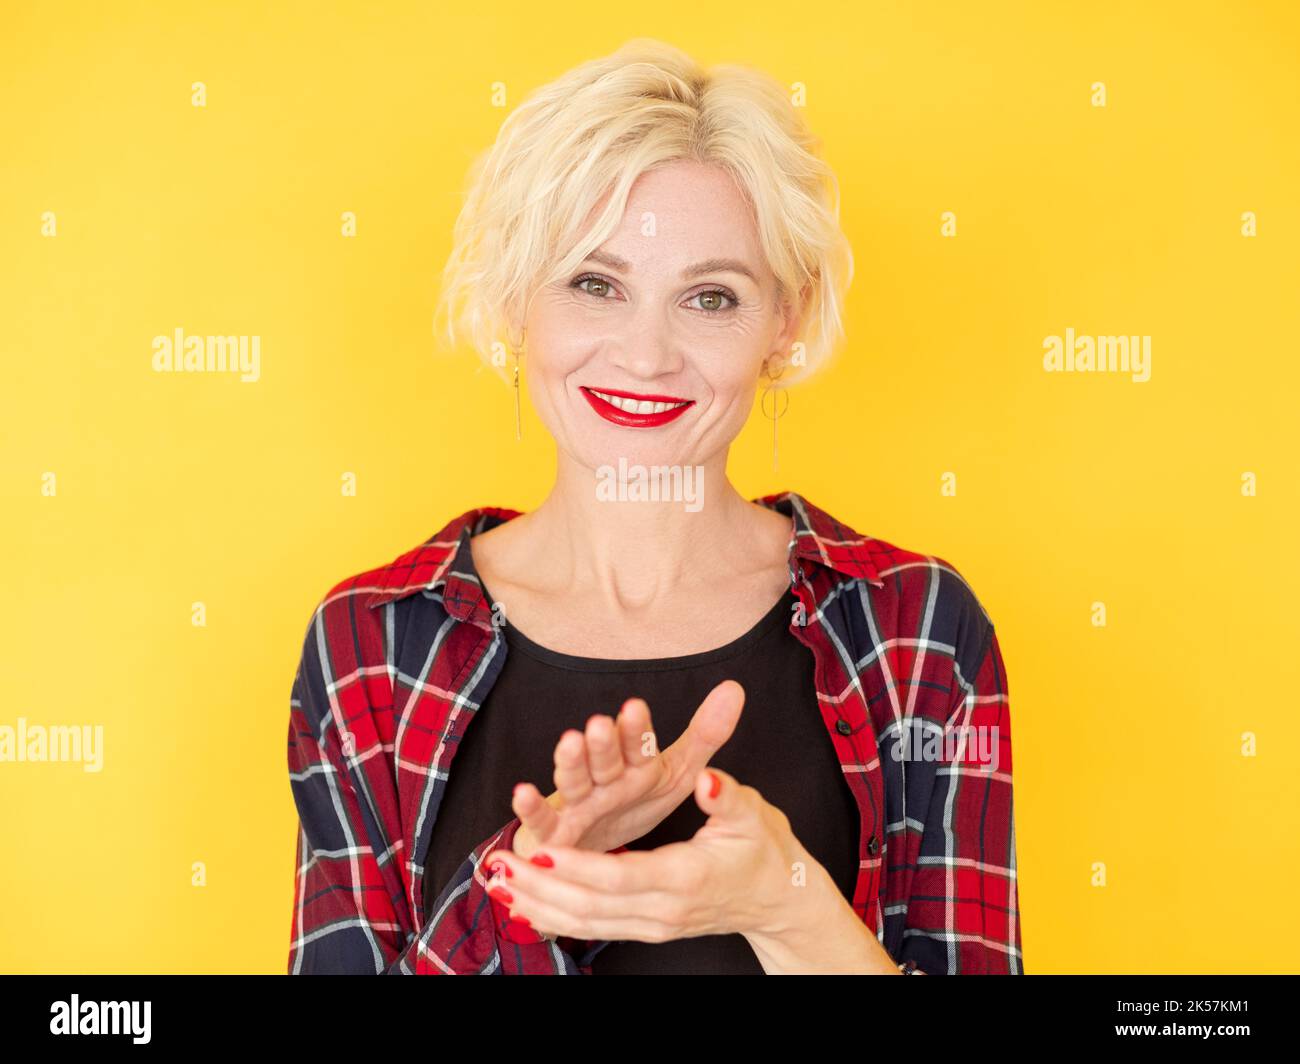 bravo applause happy woman well done positive Stock Photo